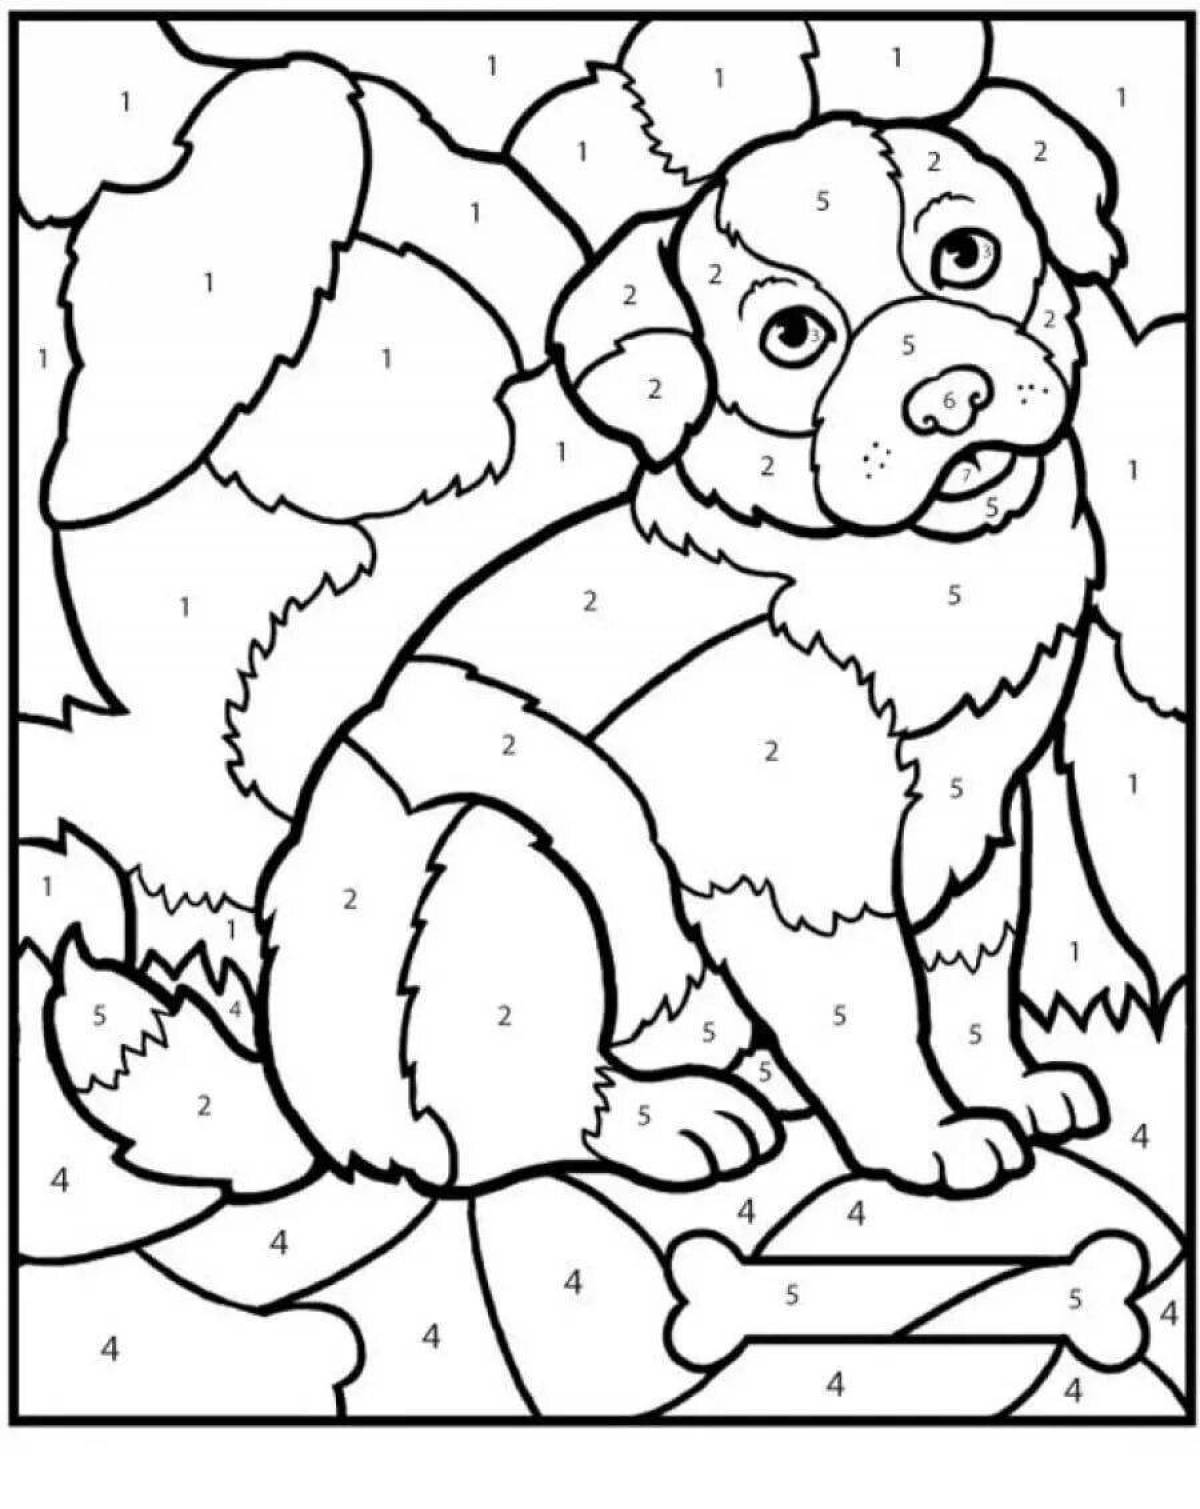 Funny bear coloring by numbers